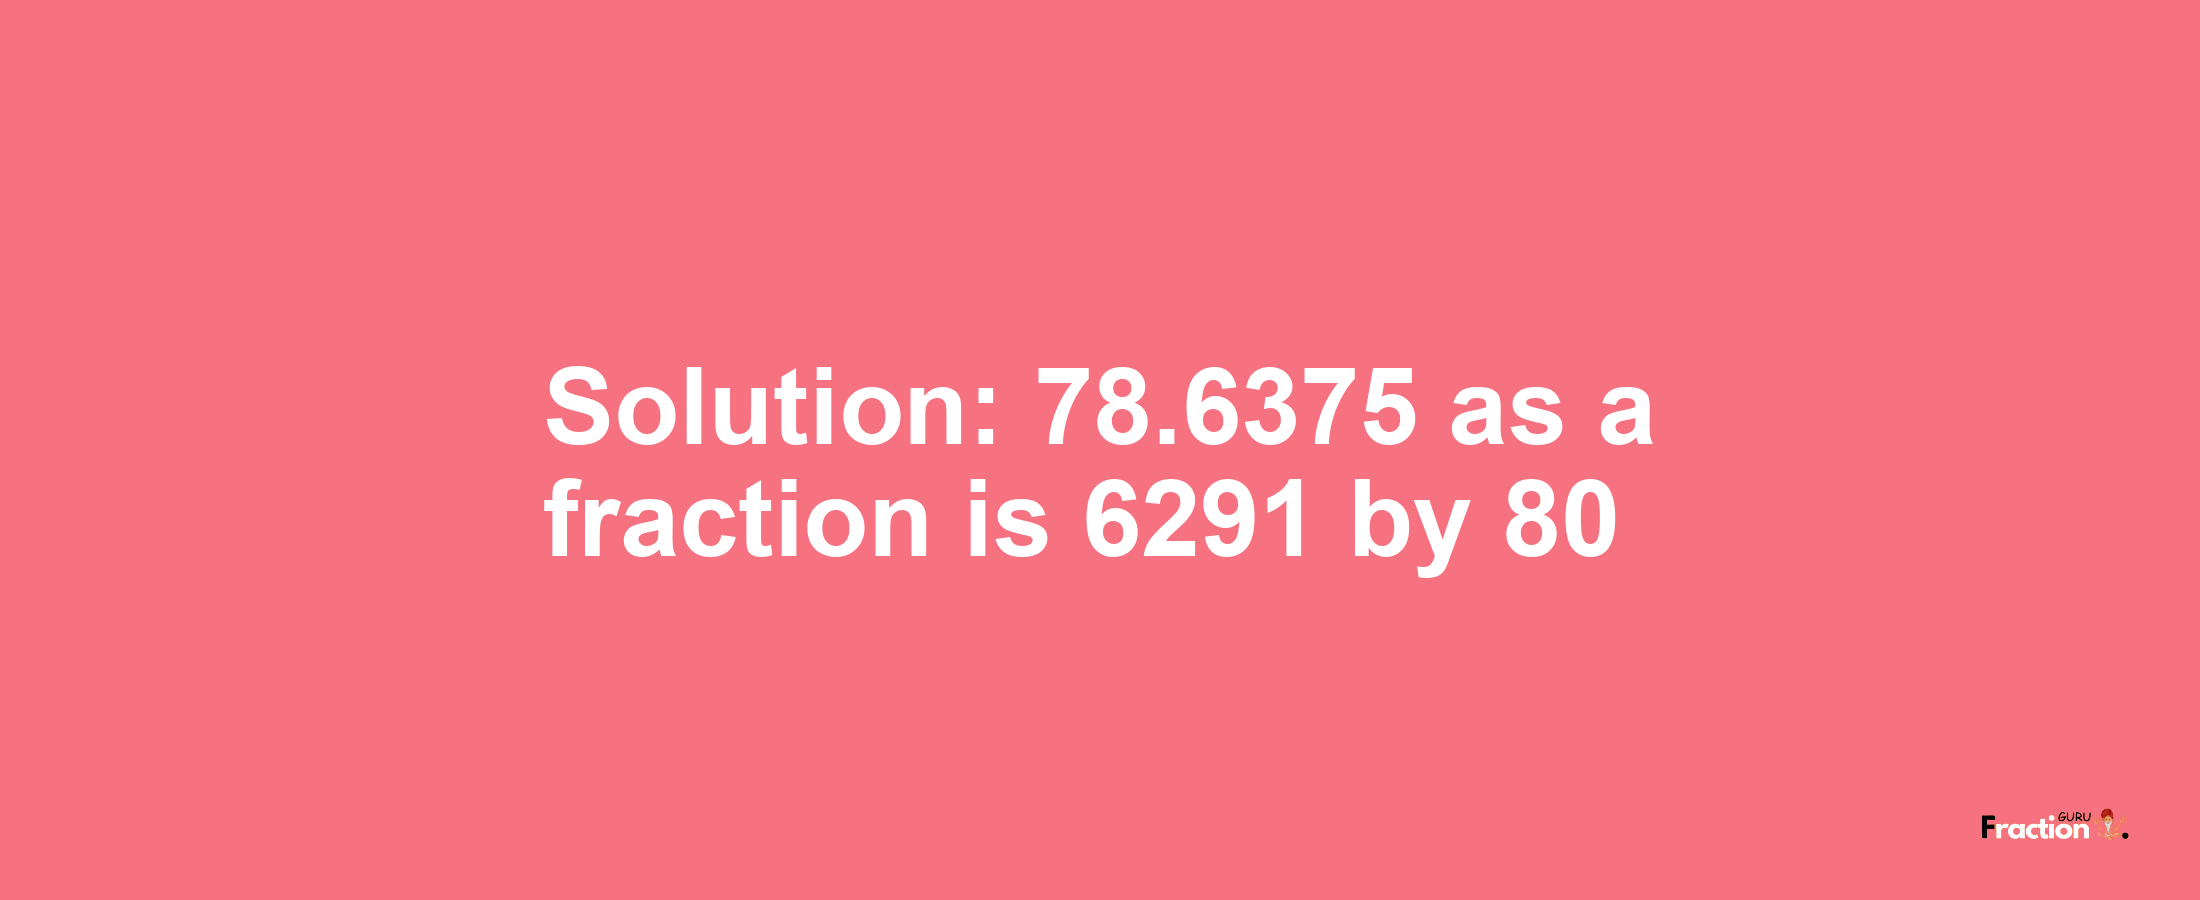 Solution:78.6375 as a fraction is 6291/80